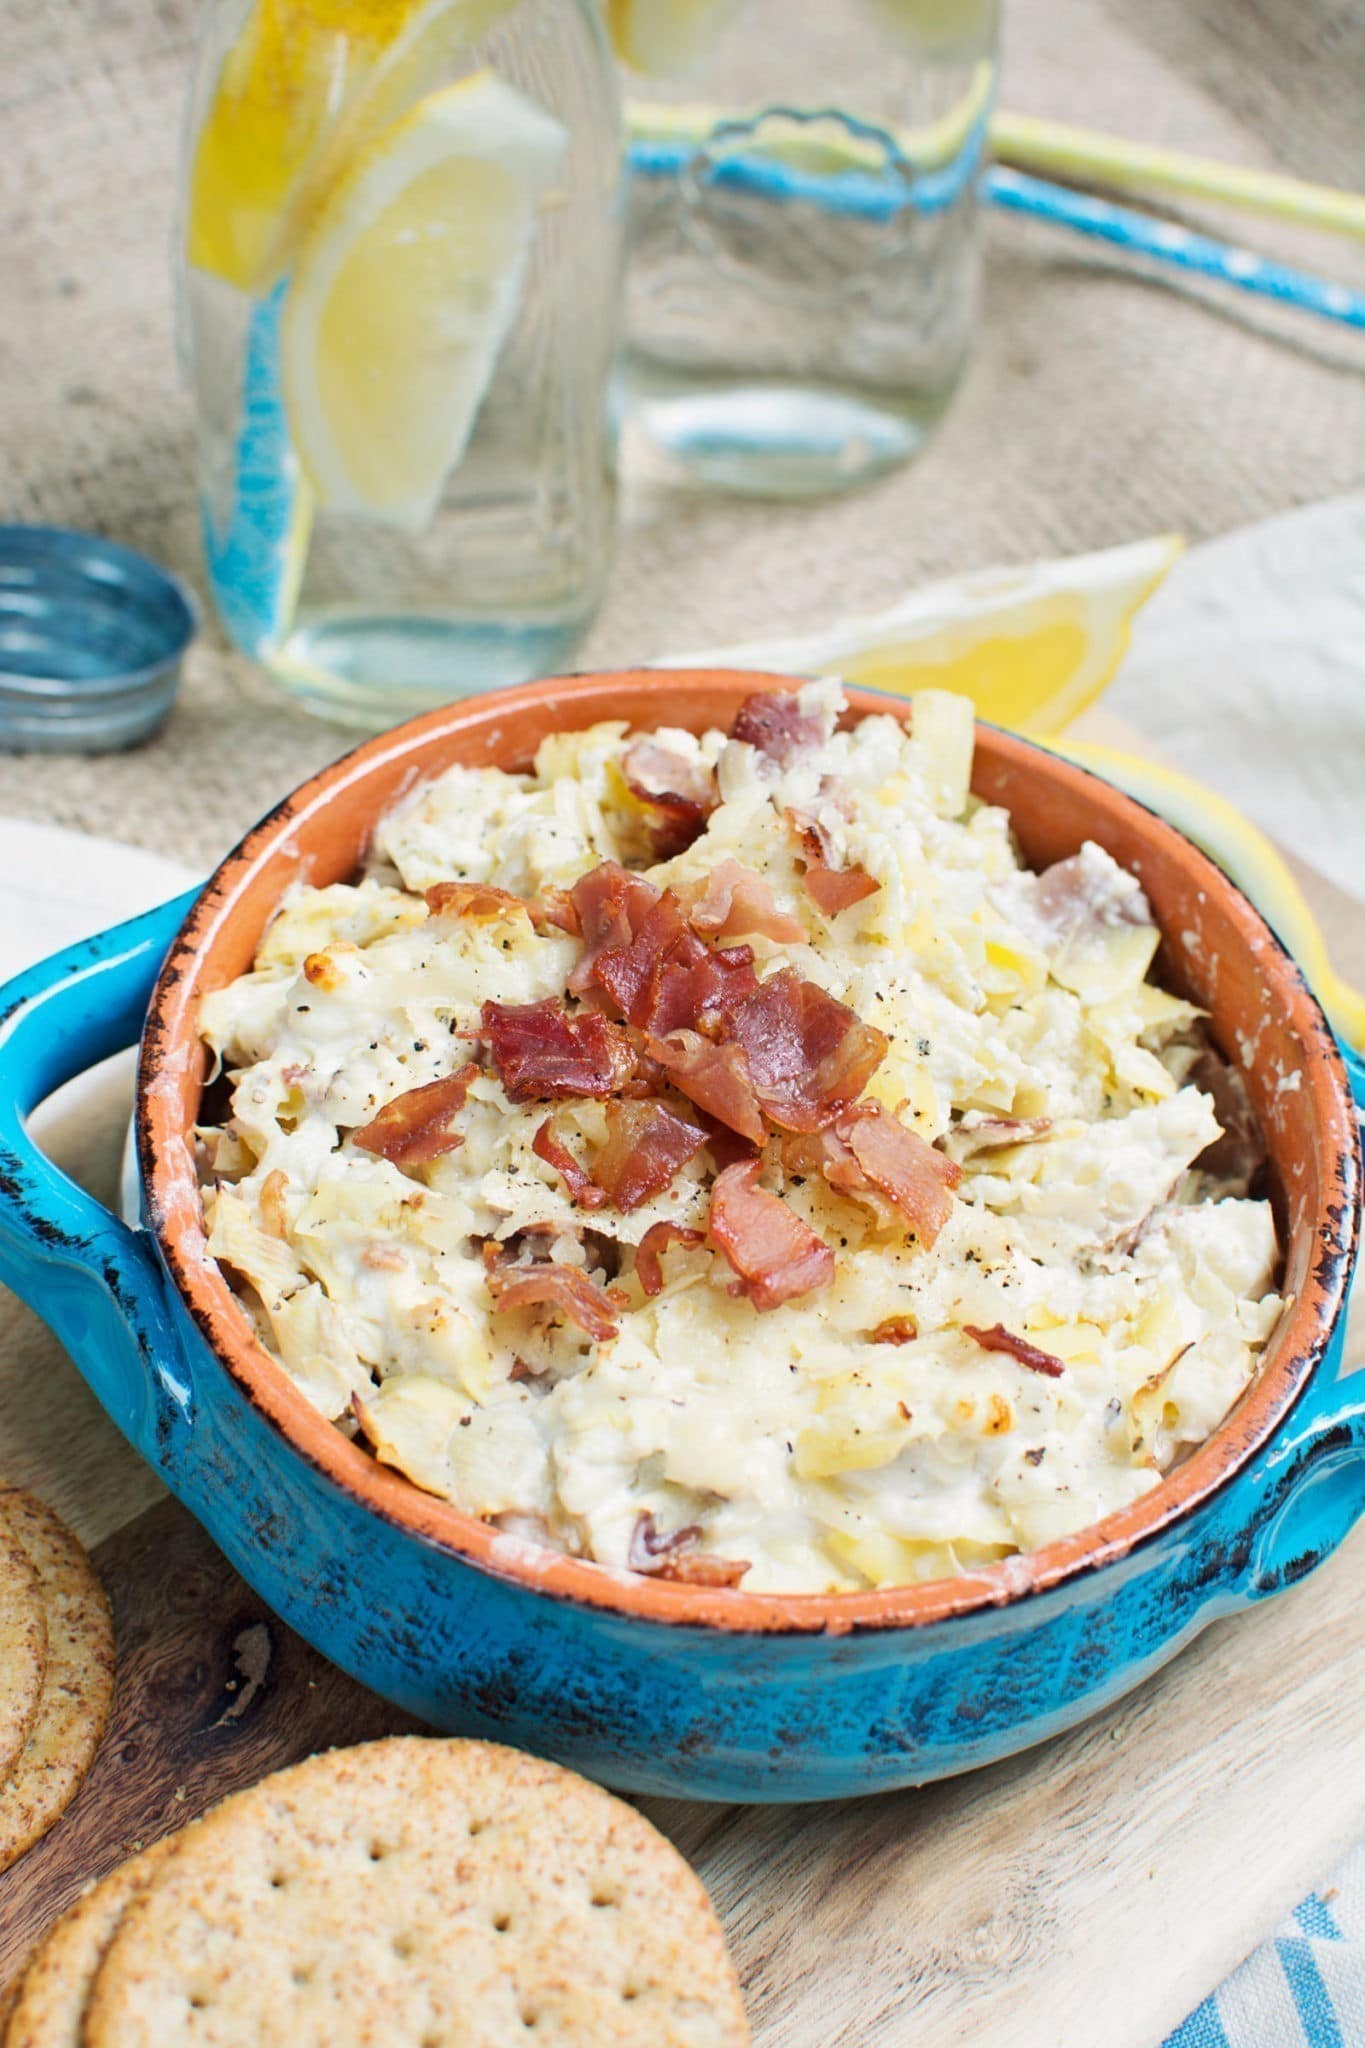 Entertain this summer and enjoy this Prosciutto Artichoke Dip with friends and family! Recipe @LittleFiggyFood